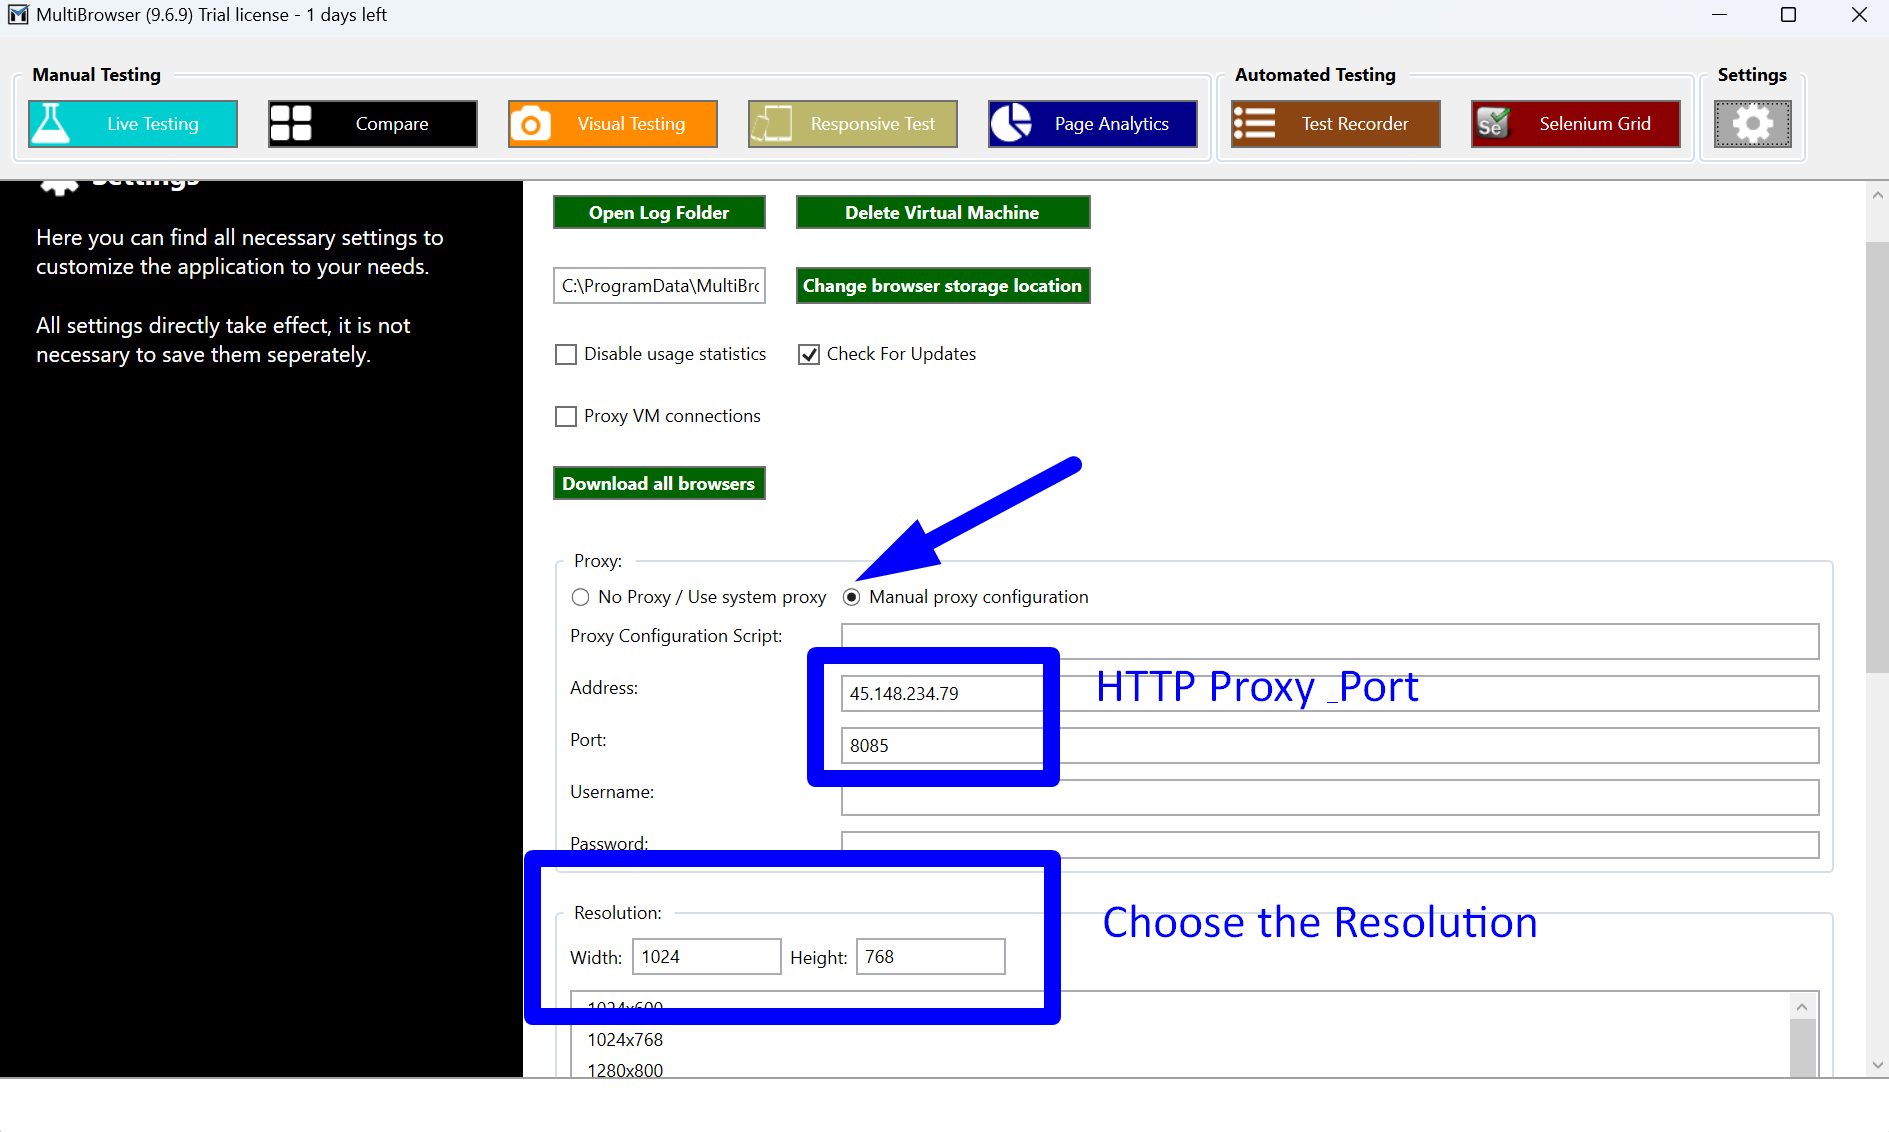 multibrowser enter proxy details and resolution